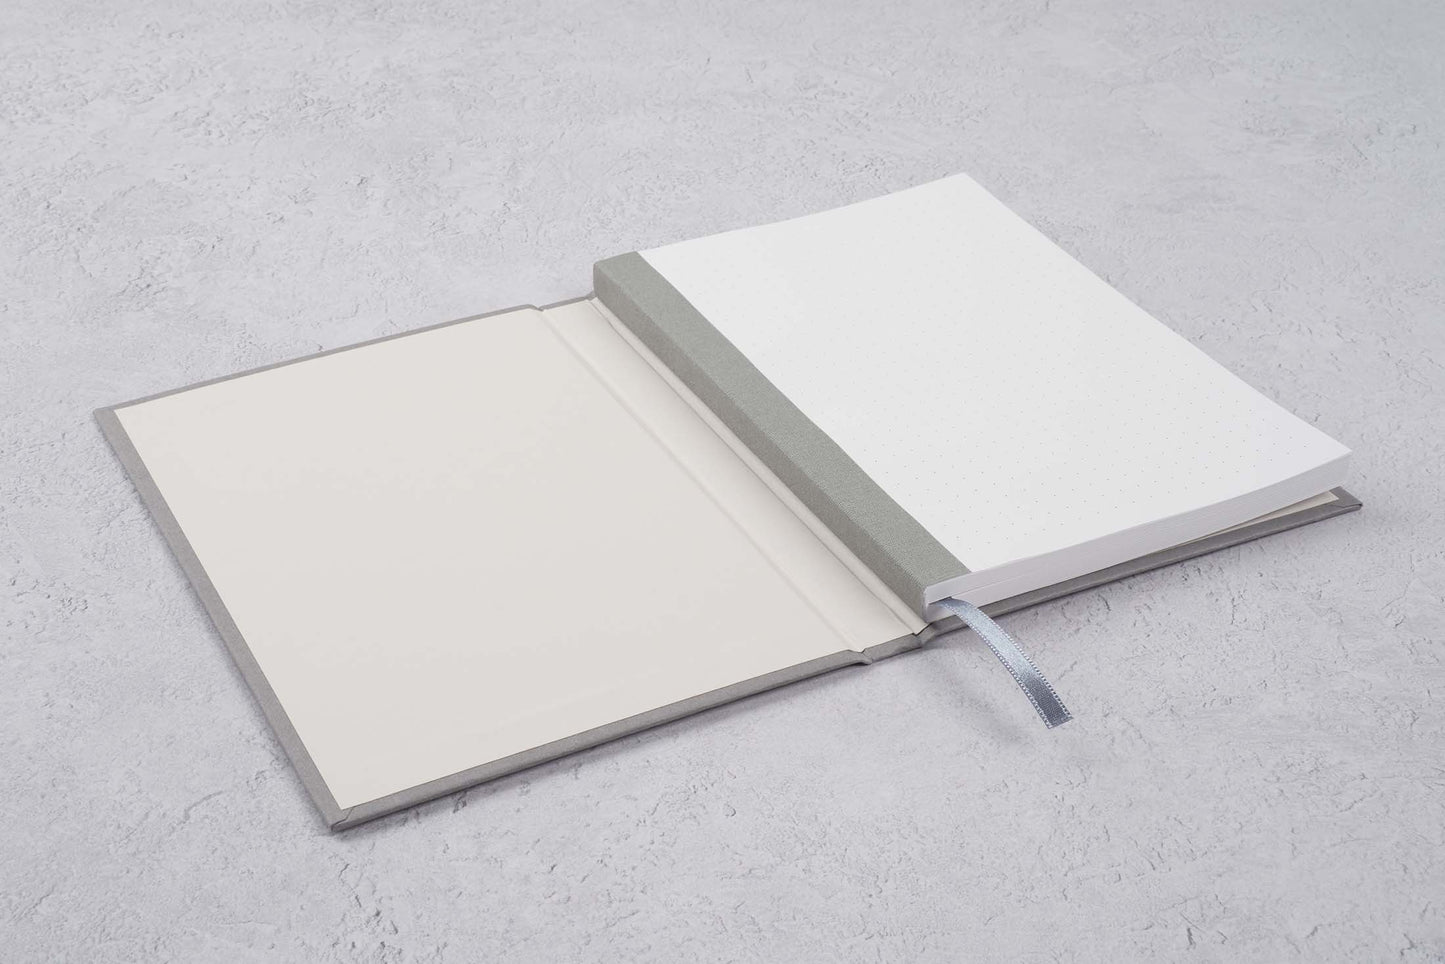 gray blocker paper notebook open showing the Swiss binding and dot grid pages. fountain pen friendly notebook open on a gray background